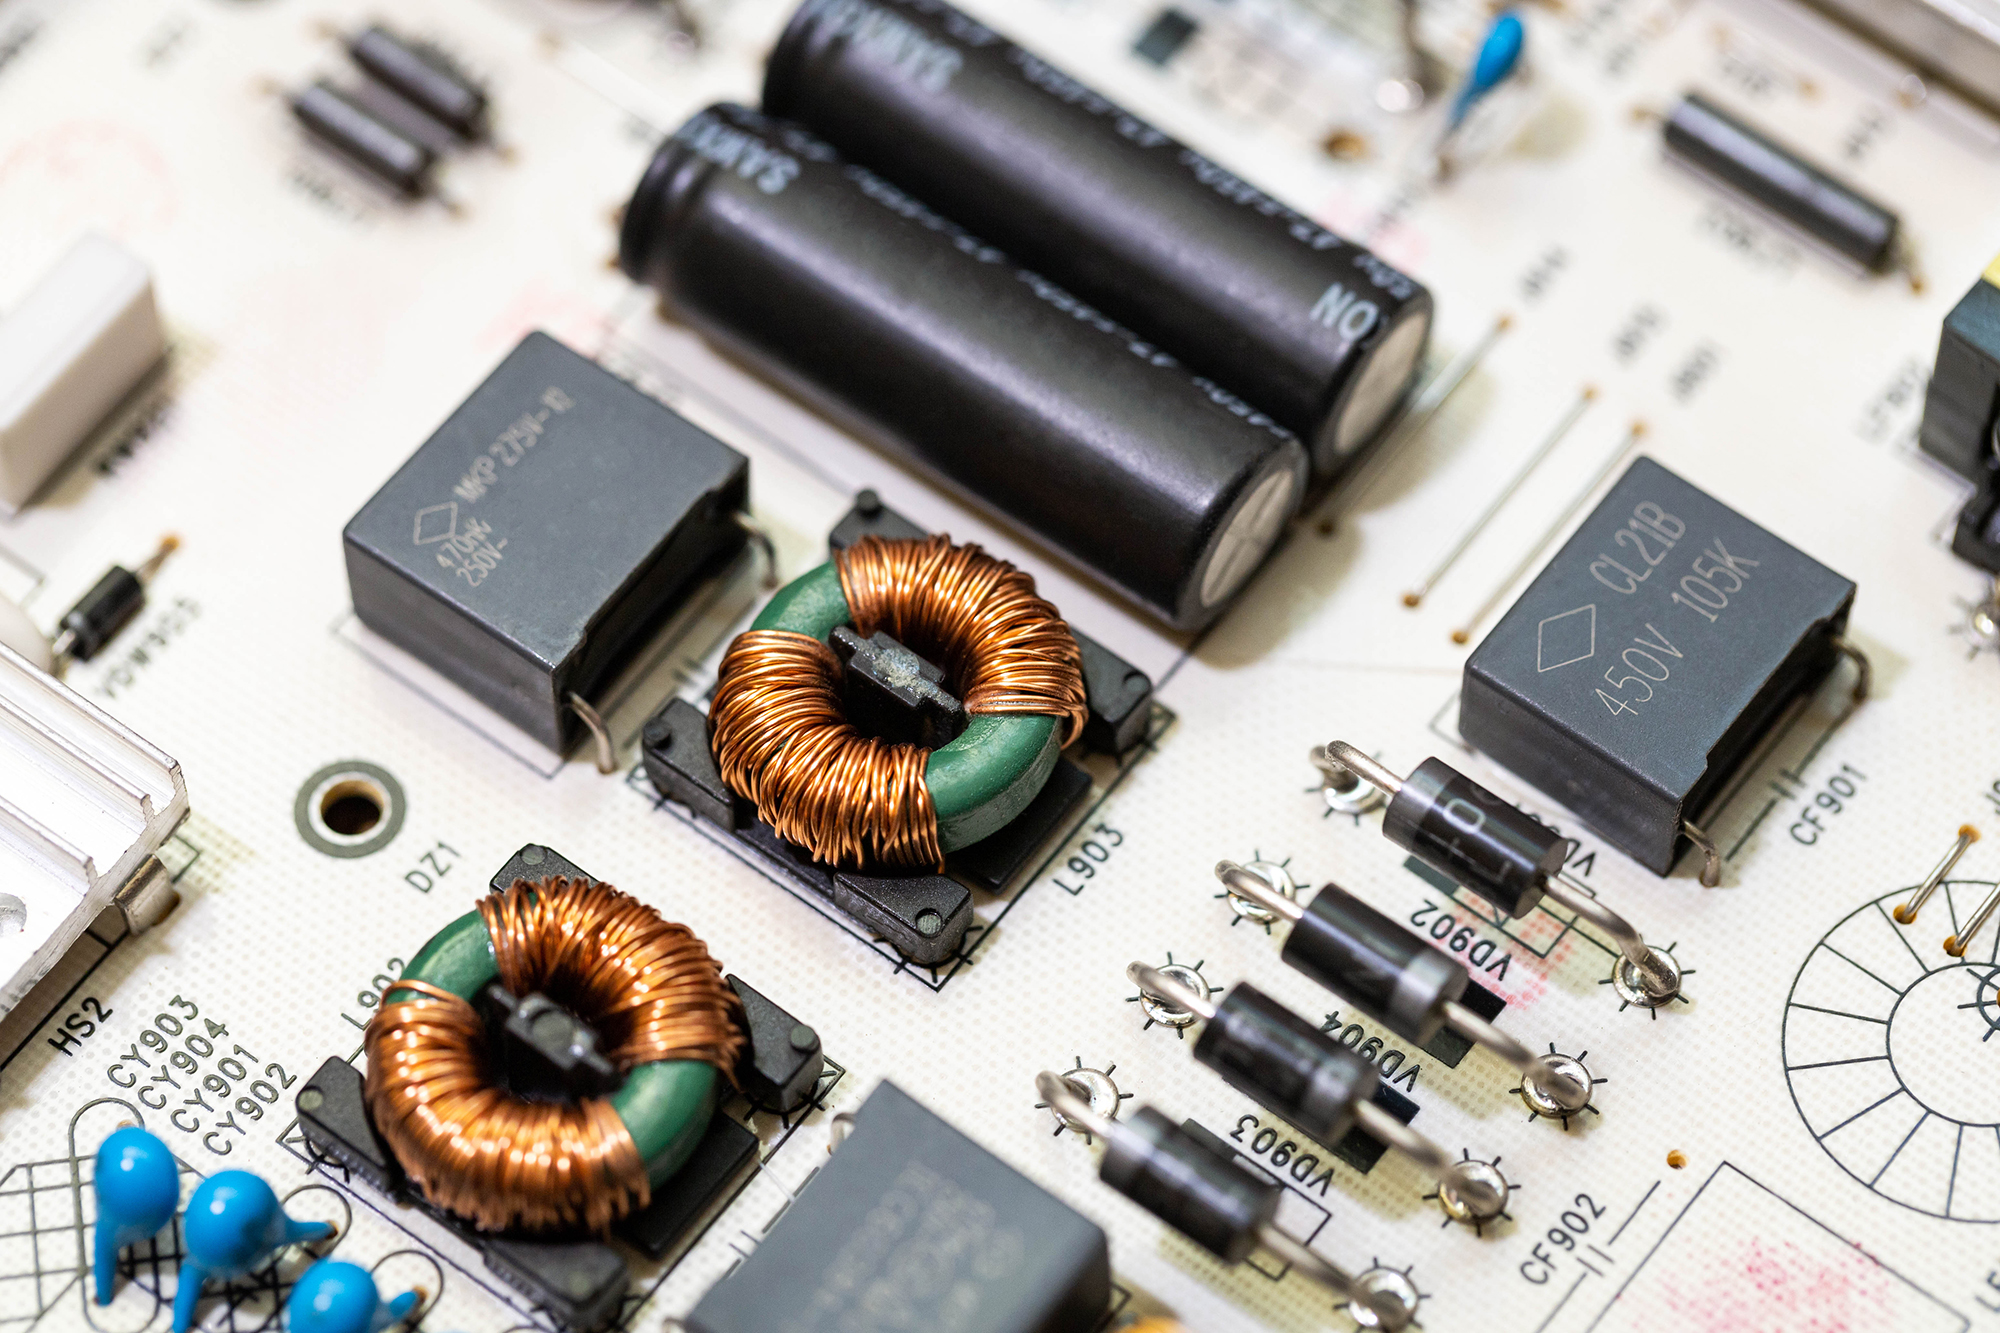 Close-up view of a circuit board with integrated capacitors and resistors.